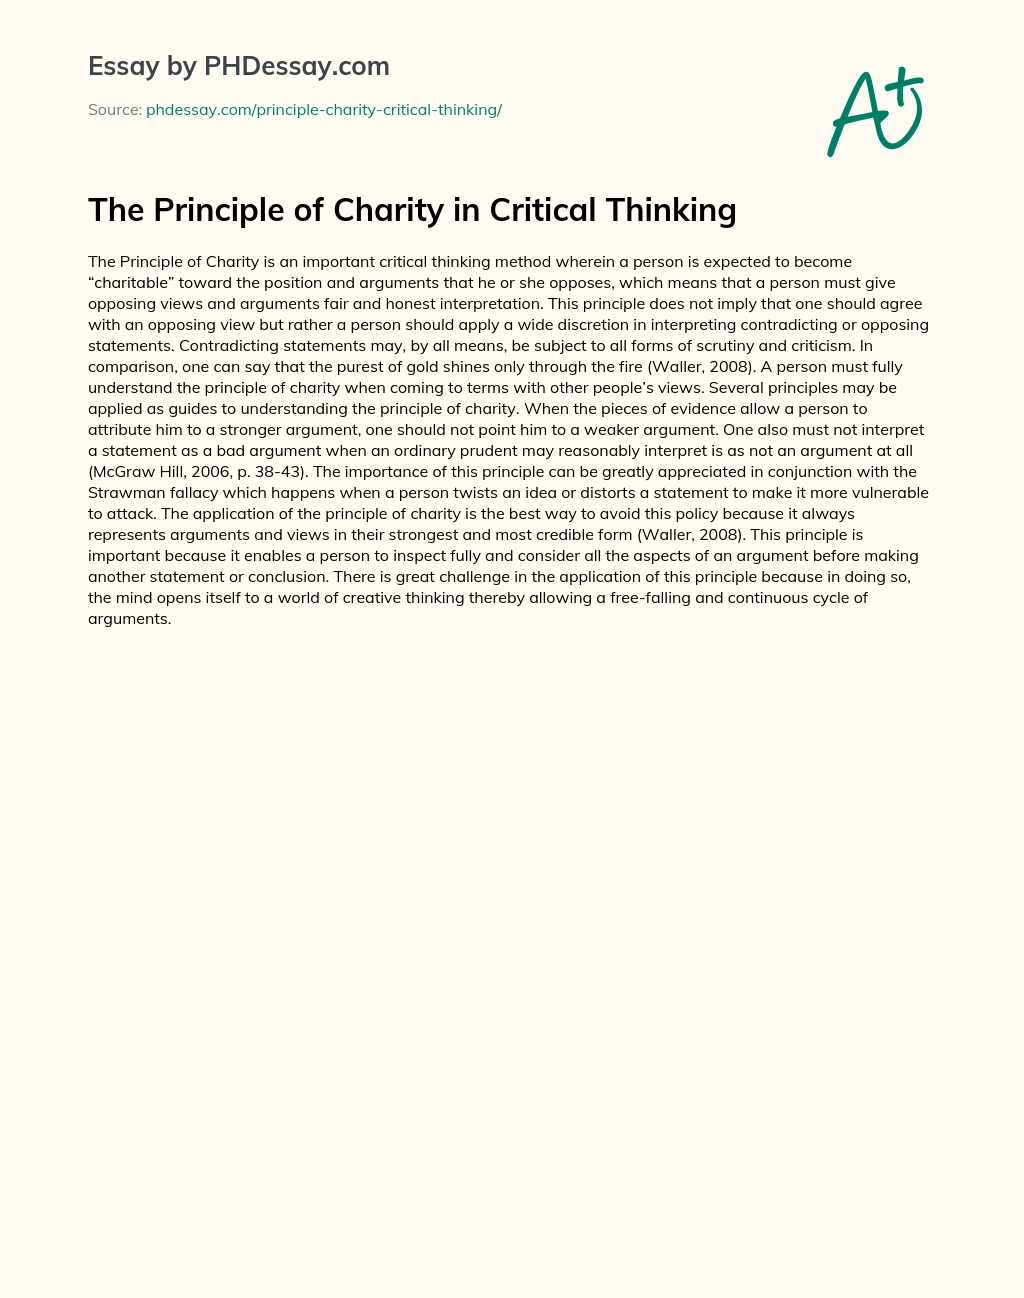 principle of charity in critical thinking